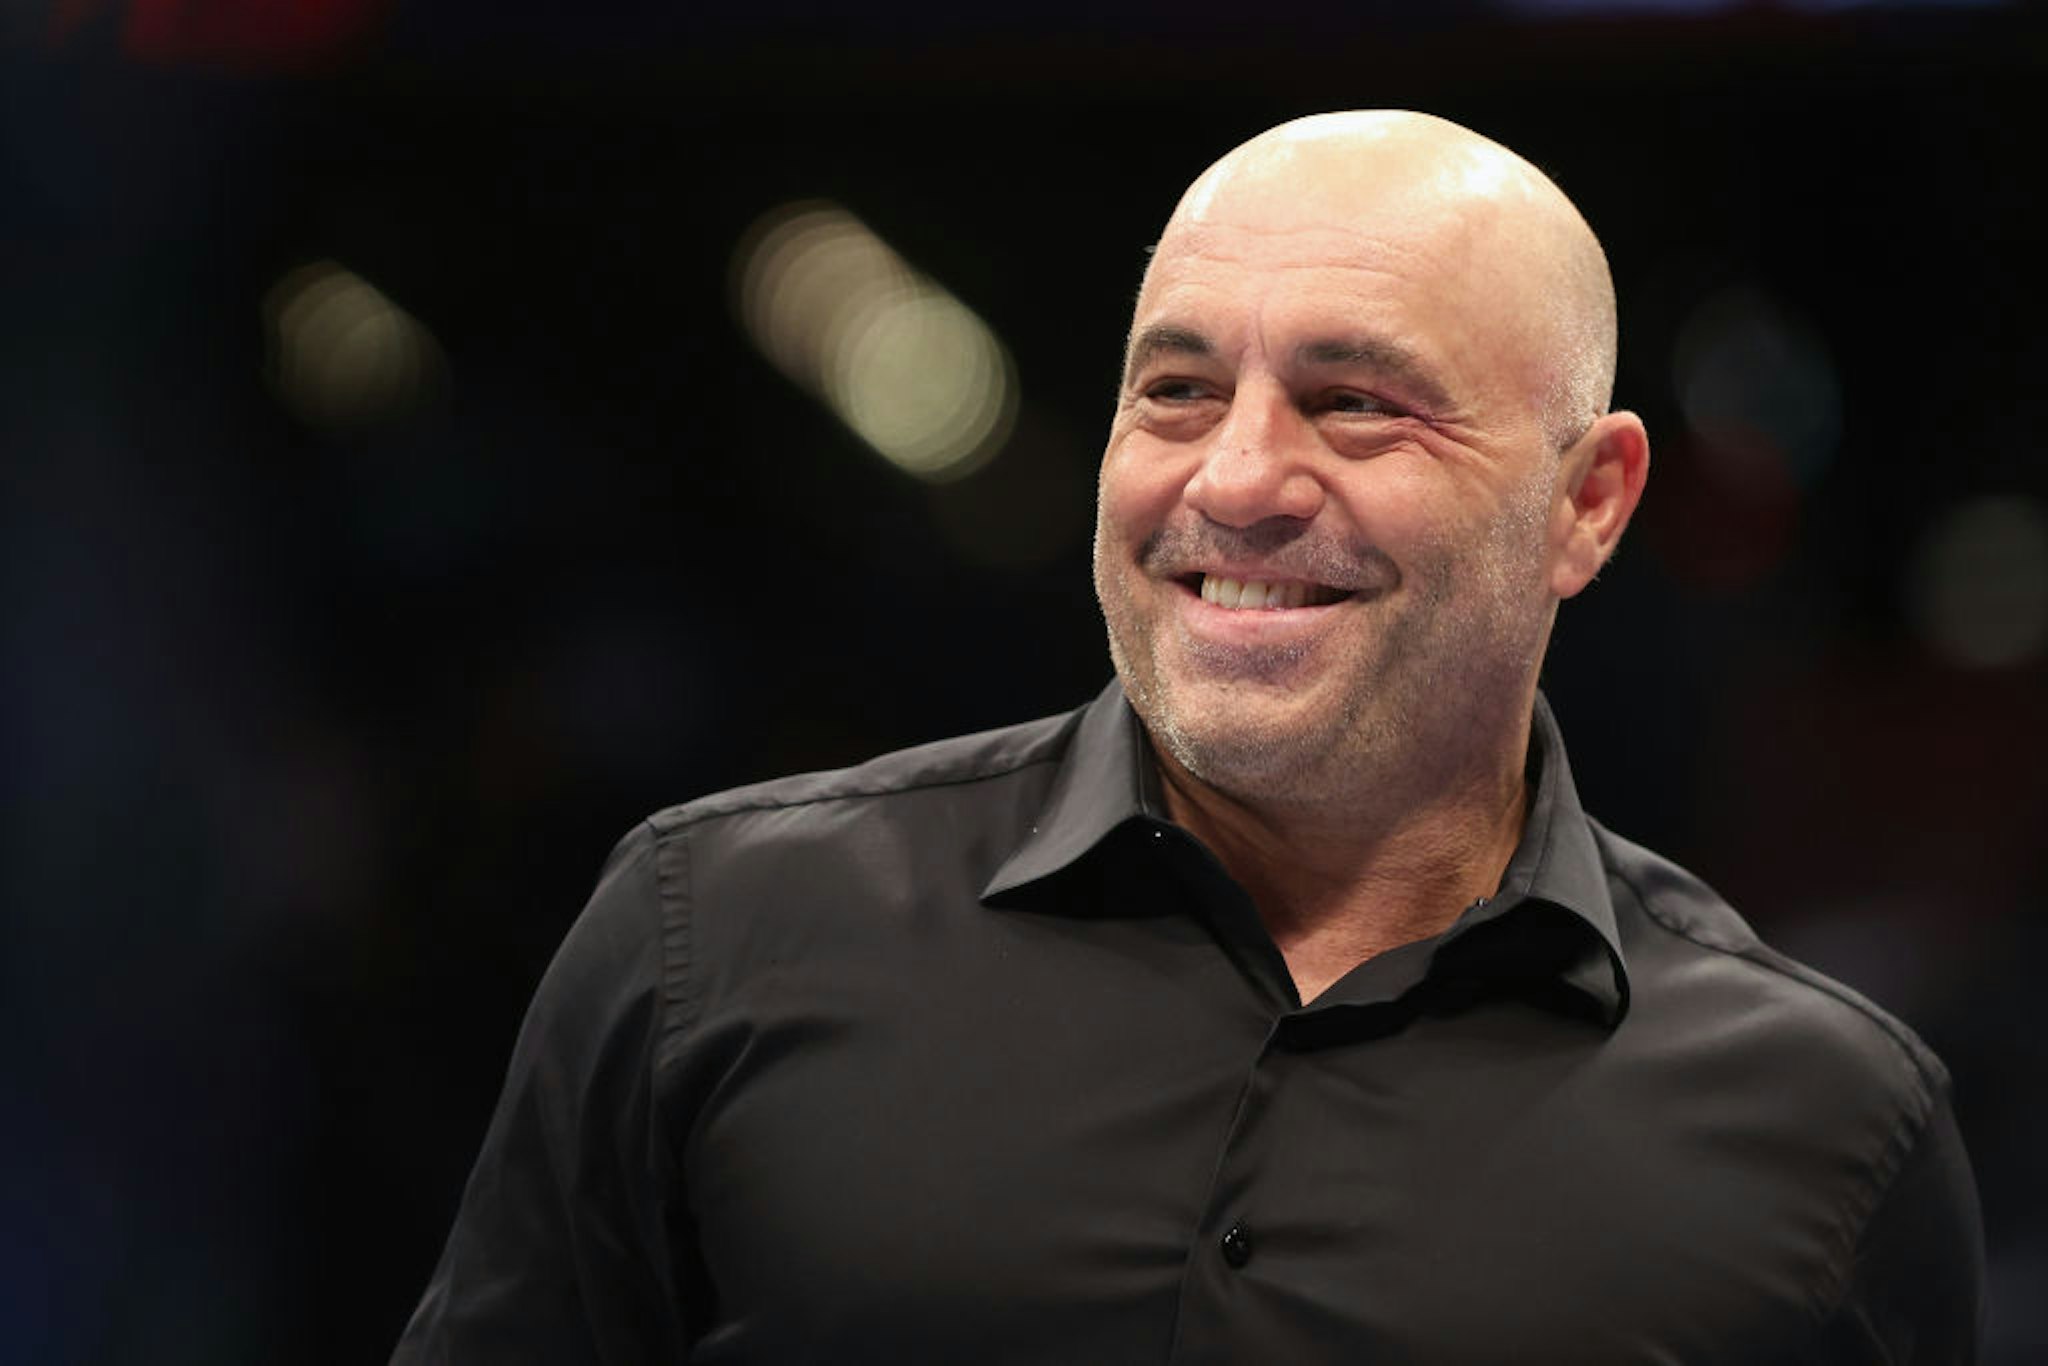 PHOENIX, ARIZONA - MAY 07: Ultimate Fighting Championship color commentator, Joe Rogan during UFC 274 at Footprint Center on May 07, 2022 in Phoenix, Arizona. (Photo by Christian Petersen/Getty Images)